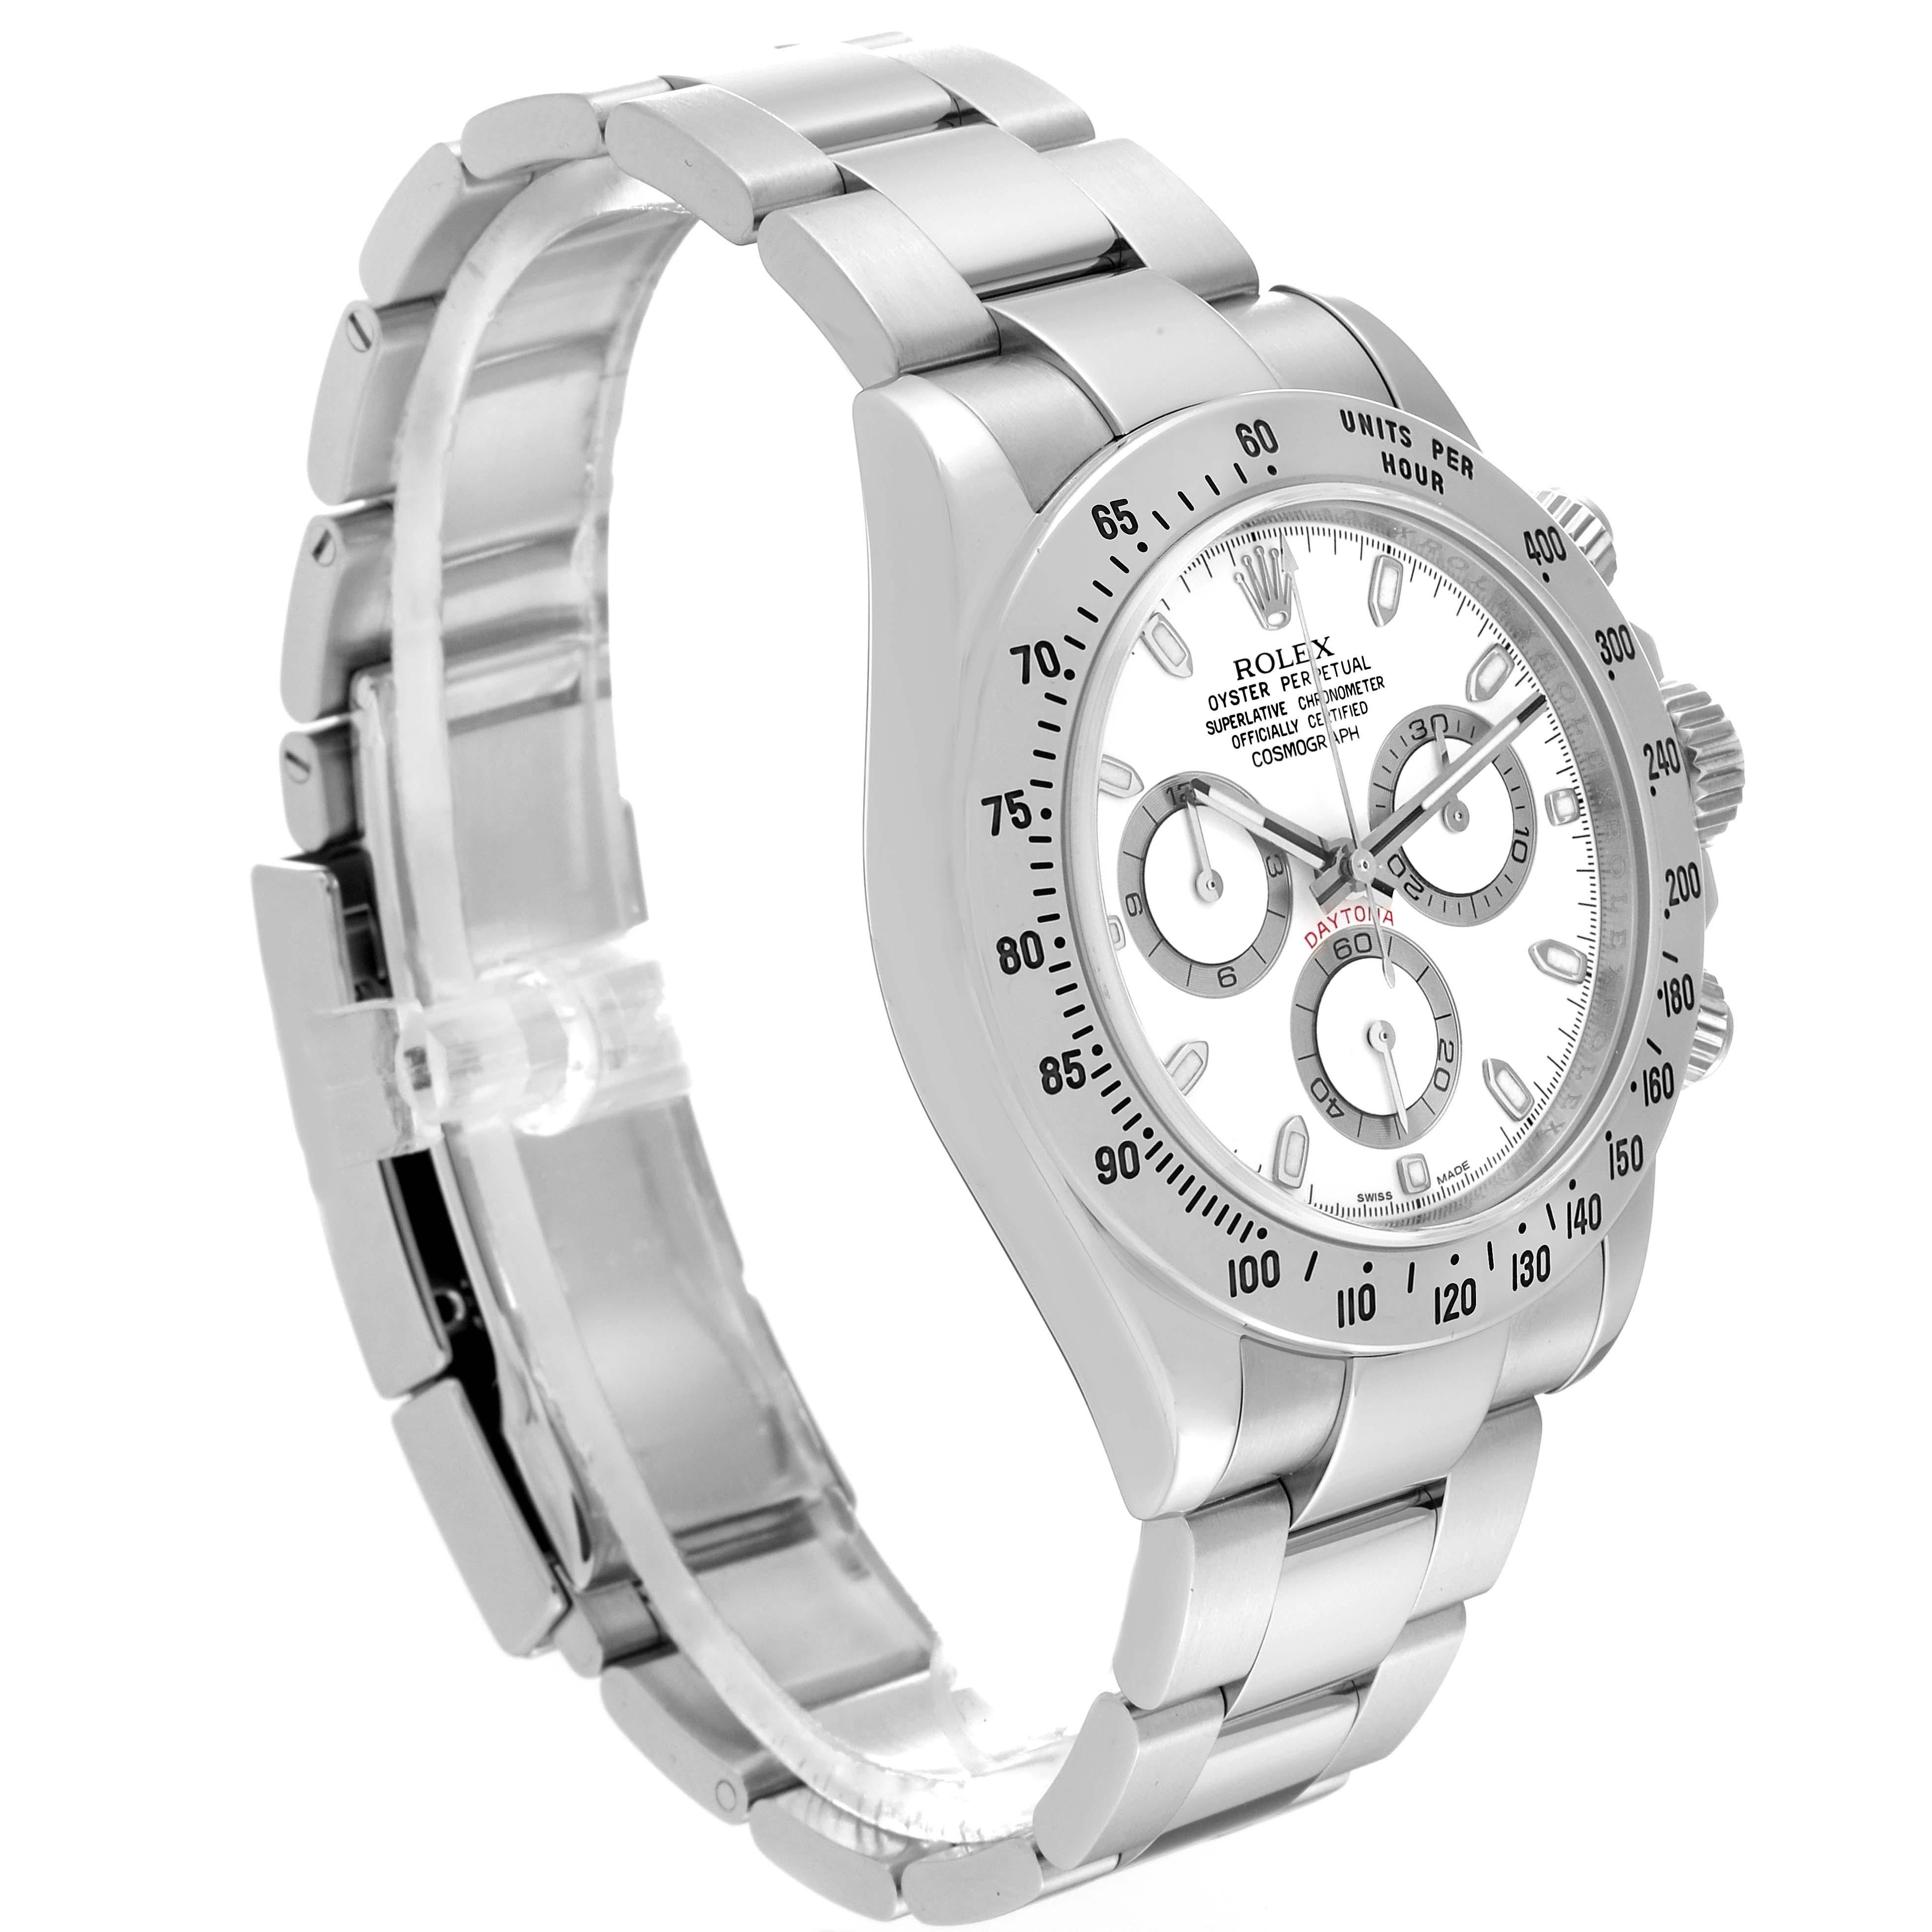 Rolex Daytona White Dial Chronograph Steel Mens Watch 116520 For Sale 5